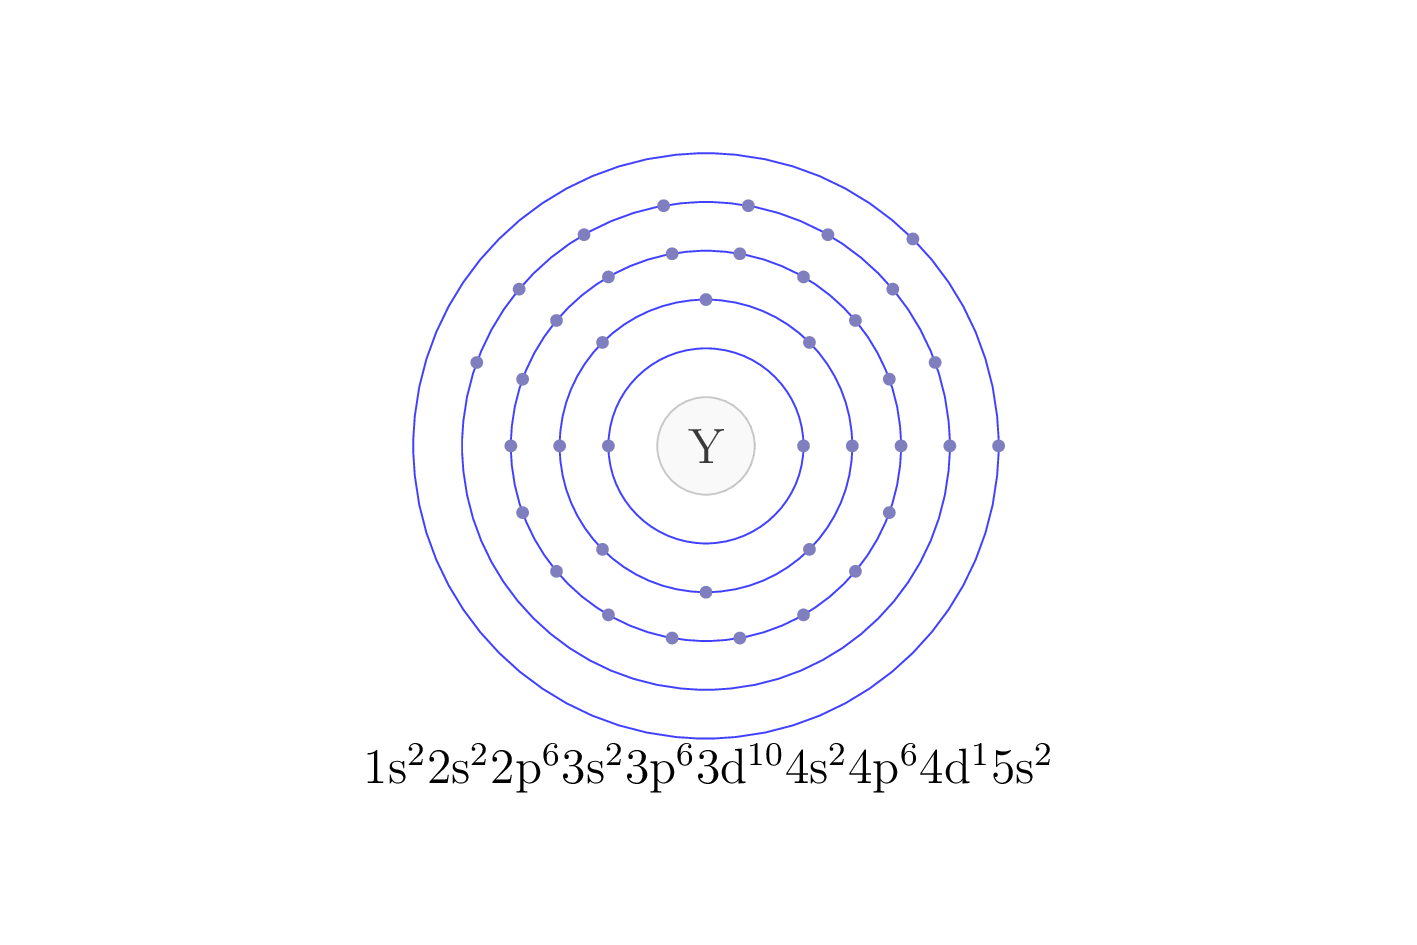 electron configuration of element Y